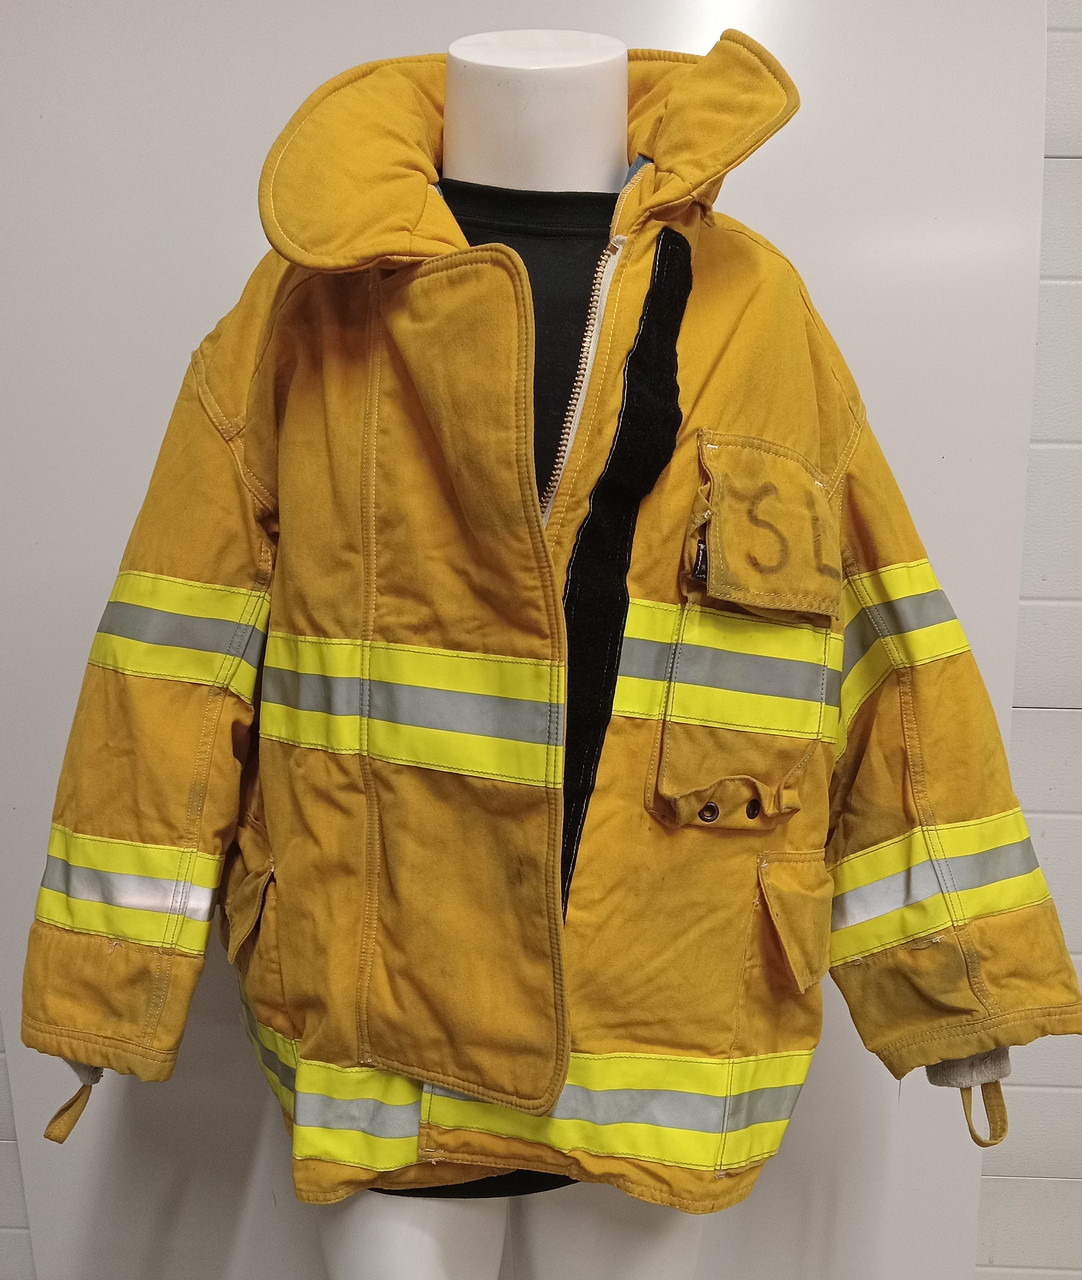 Inno Tex  Firefighter Turnout Coat  Size  6748 (made in Canada)